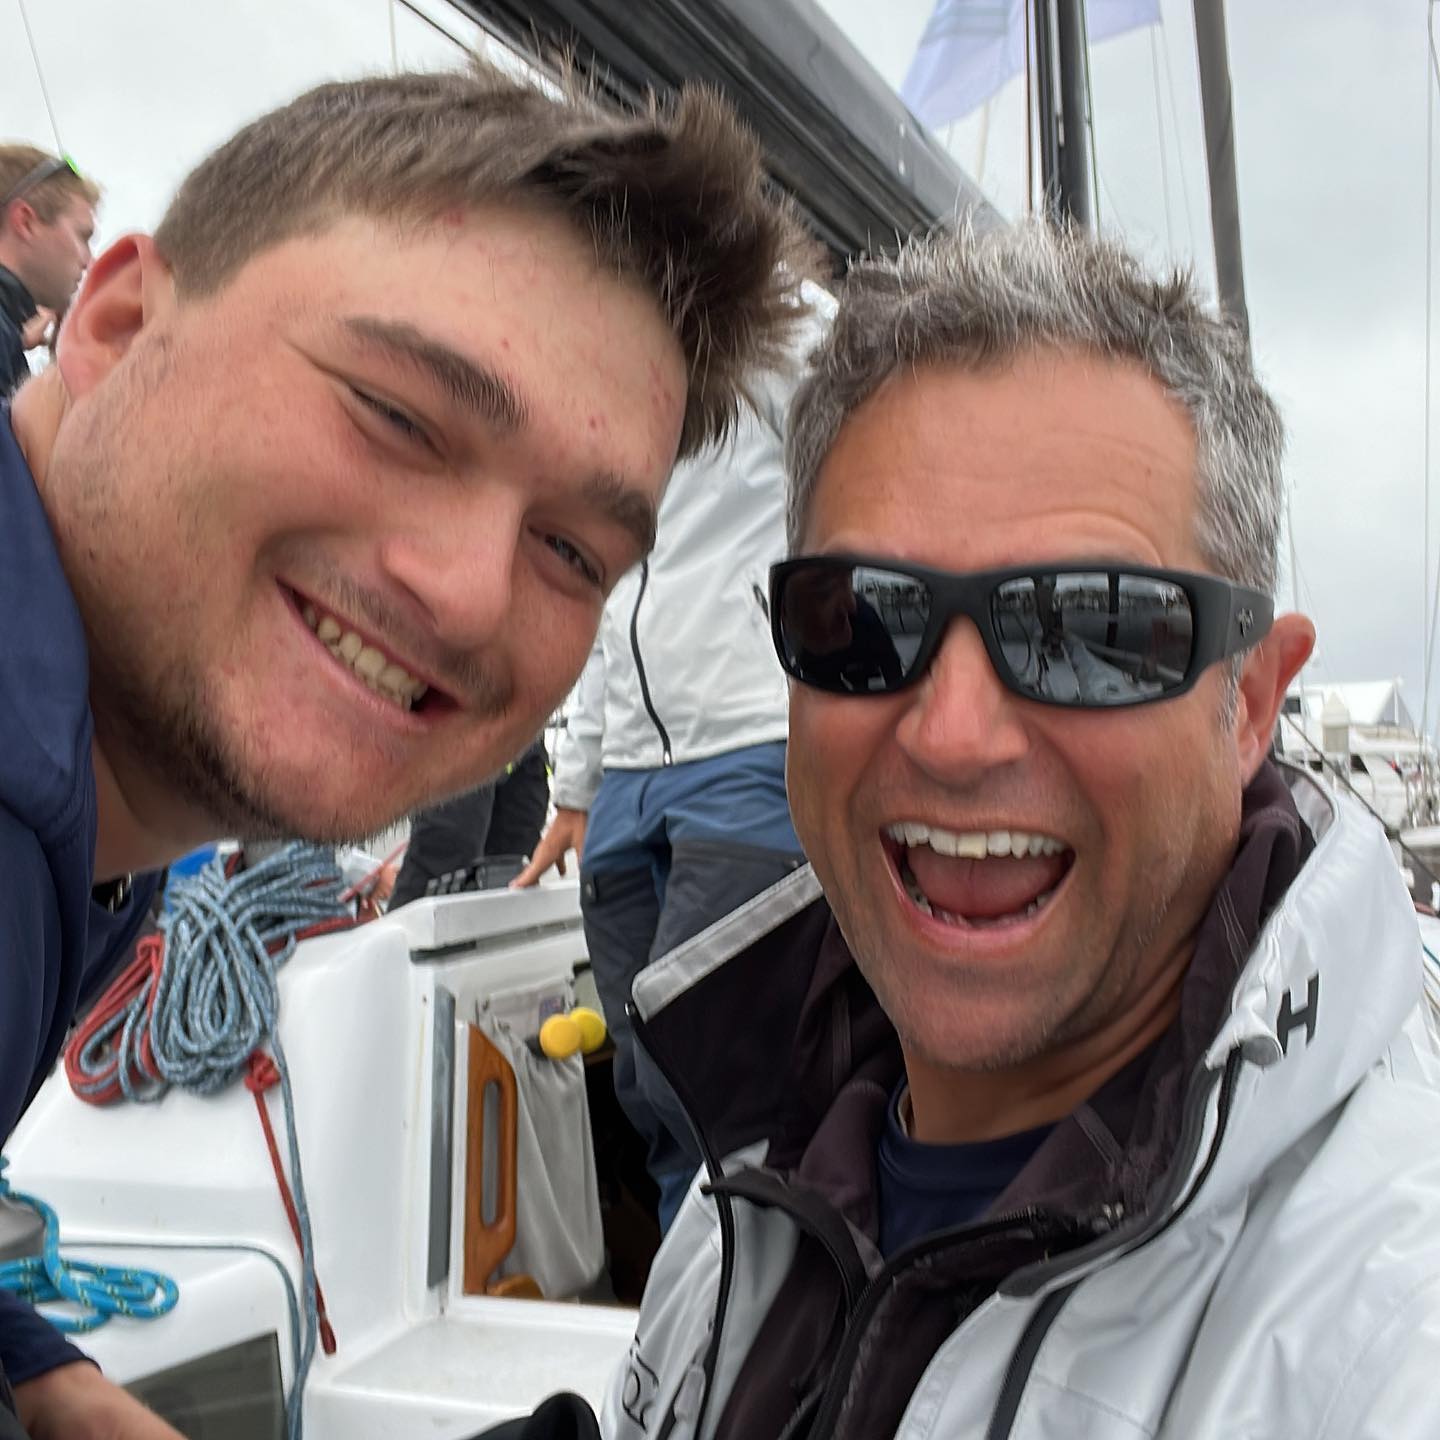 Day 2 of 2023 Rolex Big Boat on Saoirse – currently tied for 4th